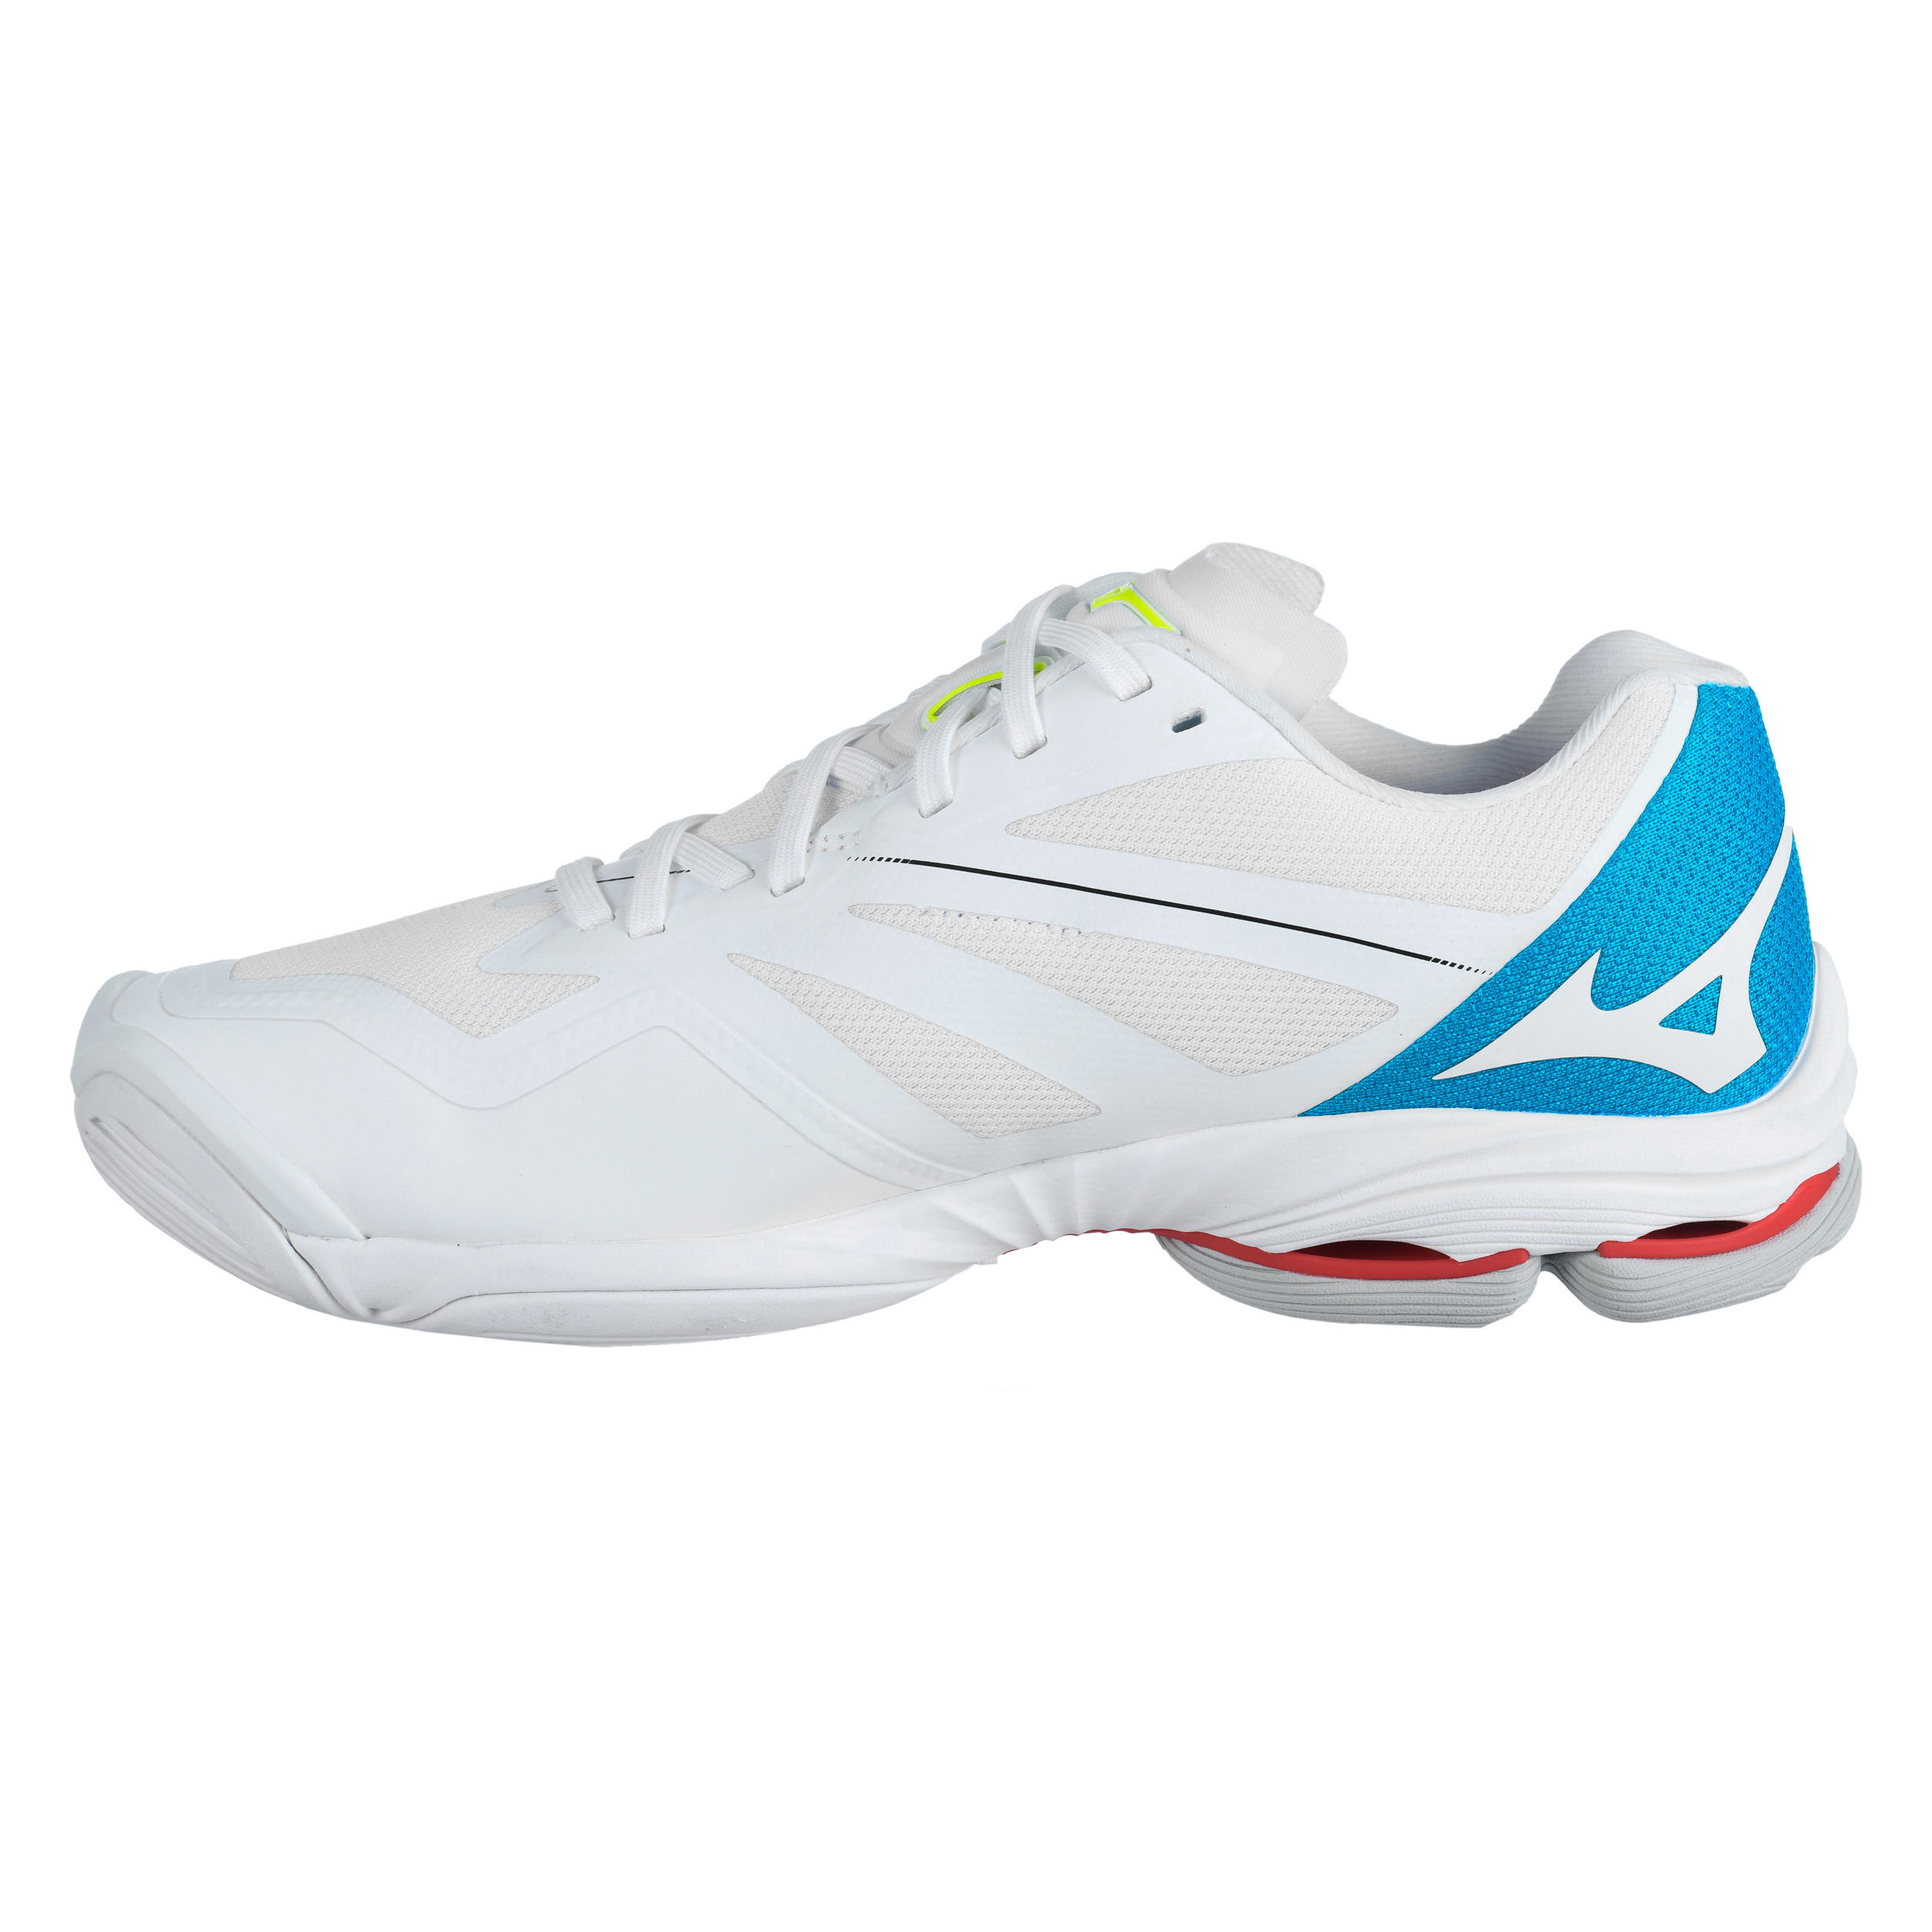 Men's Volleyball Shoes Lightning Z6 - White